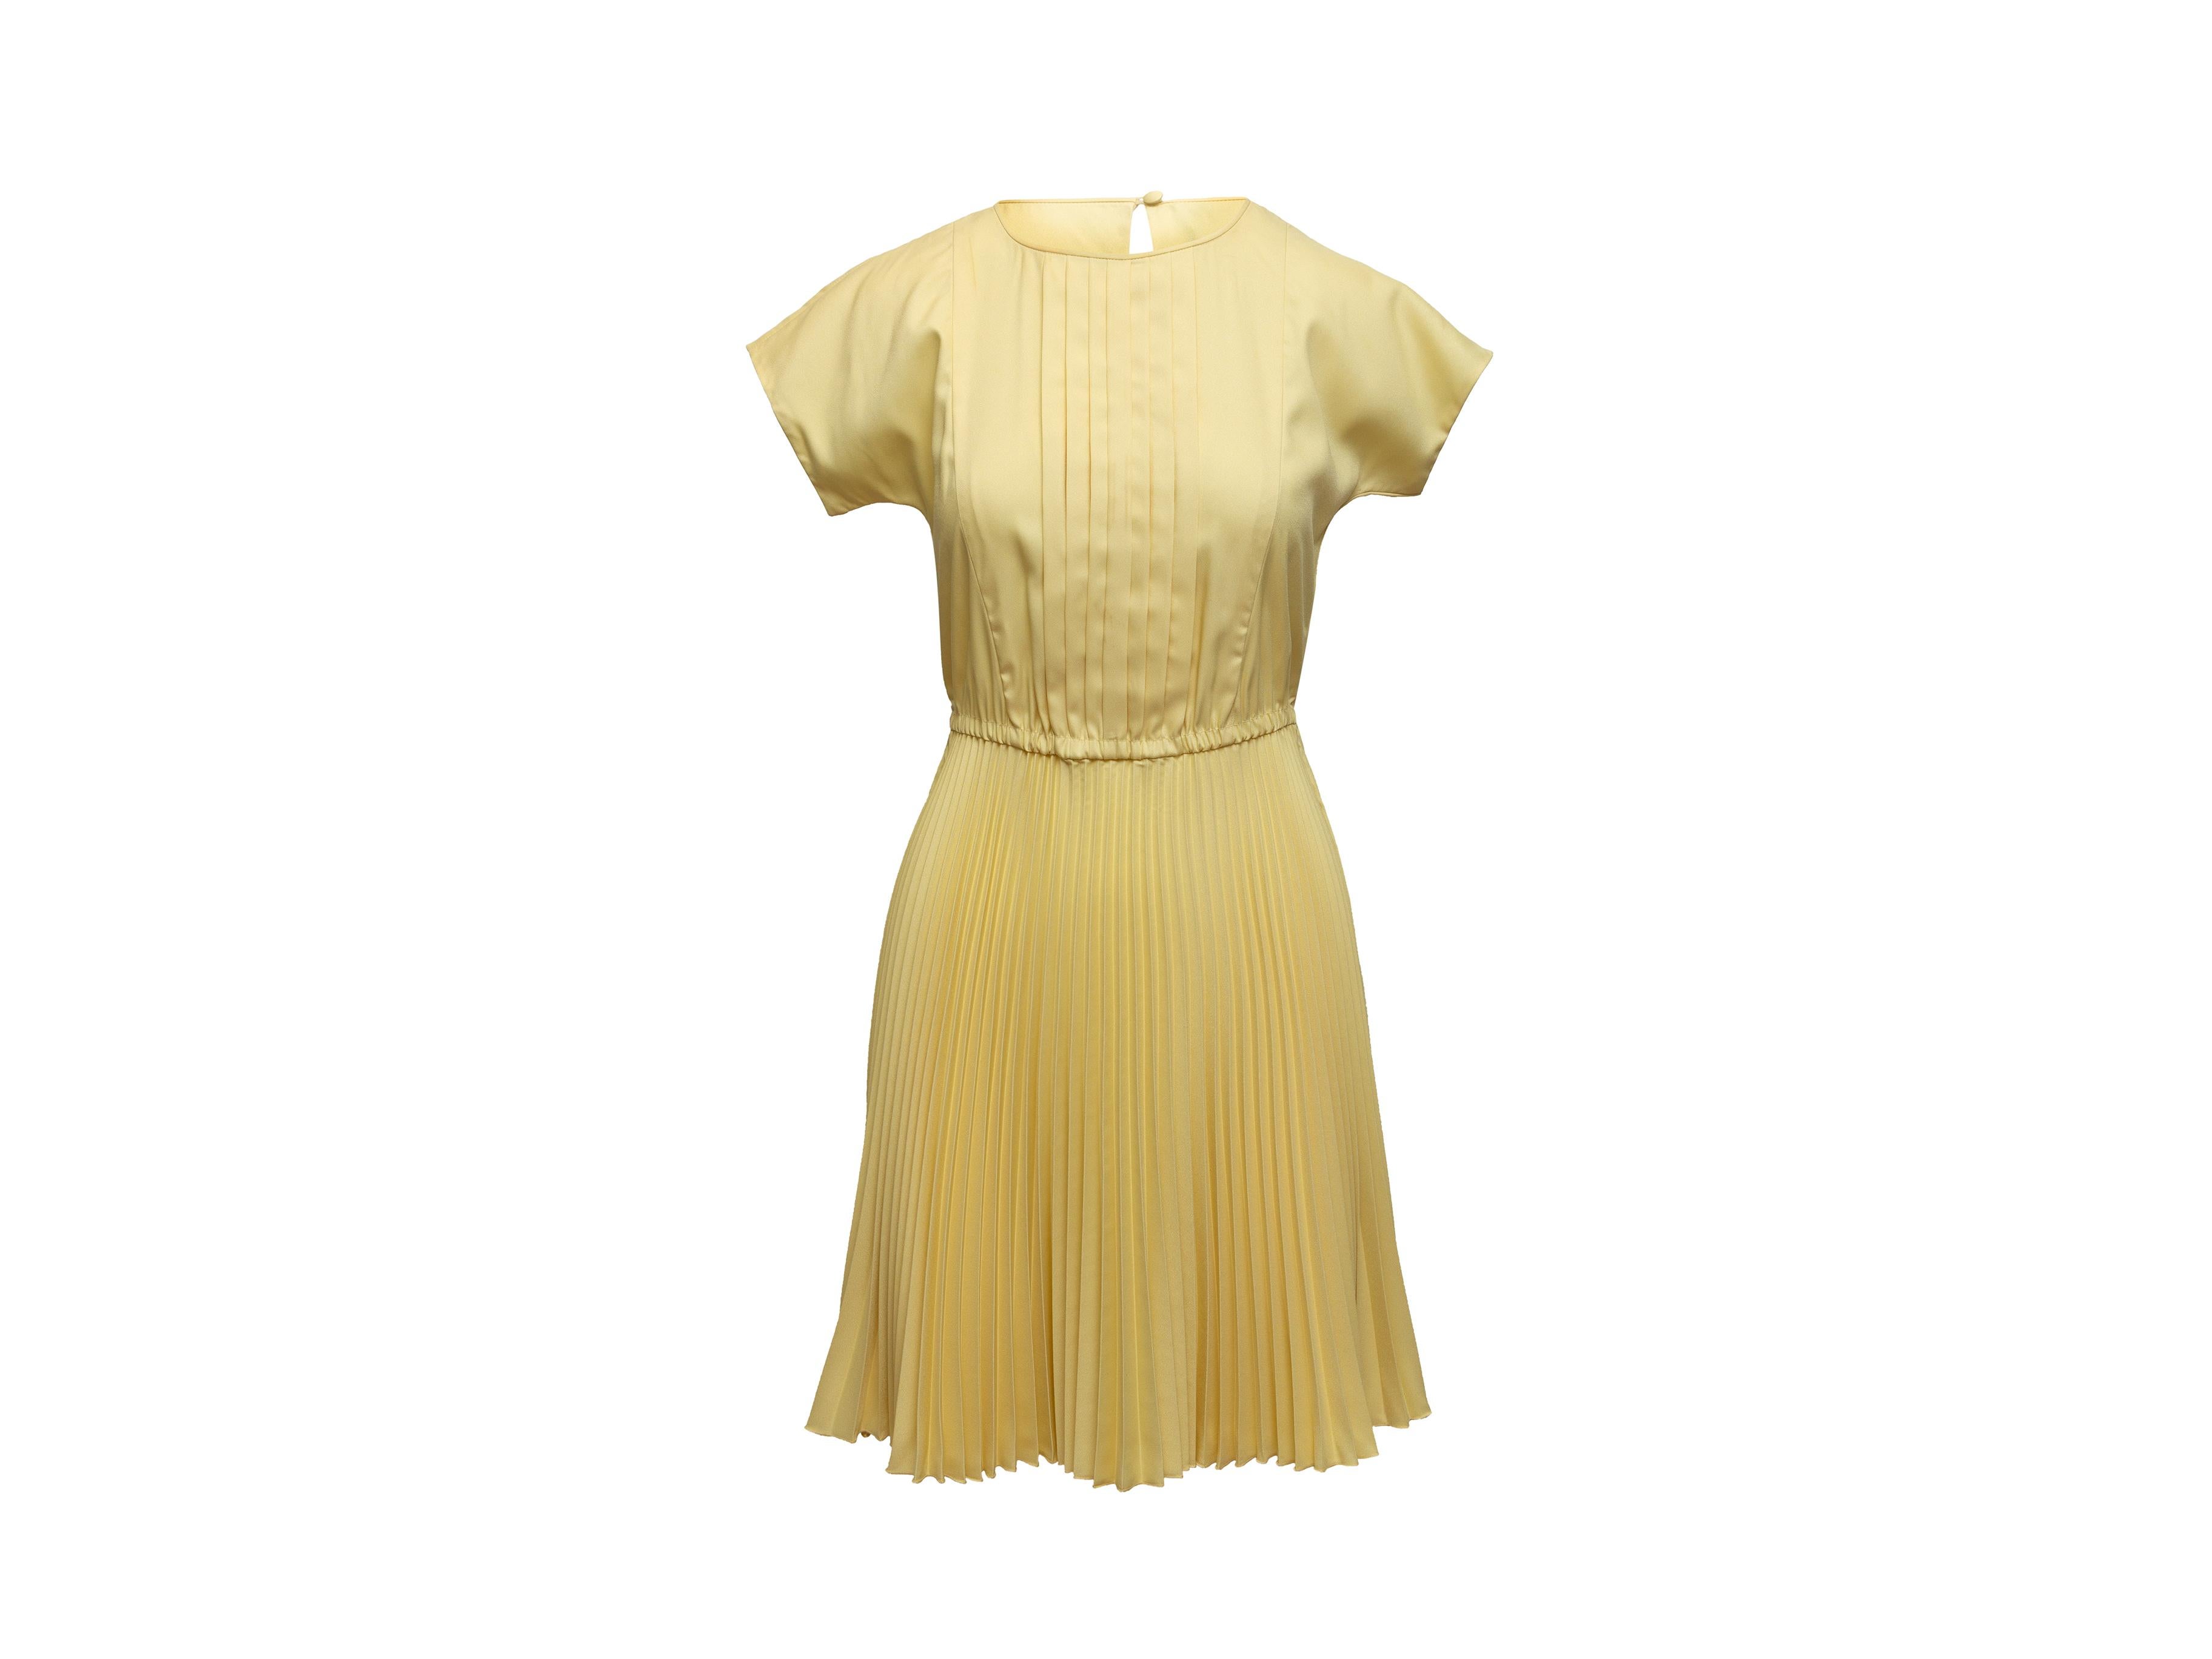 Product details: Light yellow short sleeve pleated dress by Prada. Crew neck. Elasticized waist. Keyhole at nape featuring button closure. 34